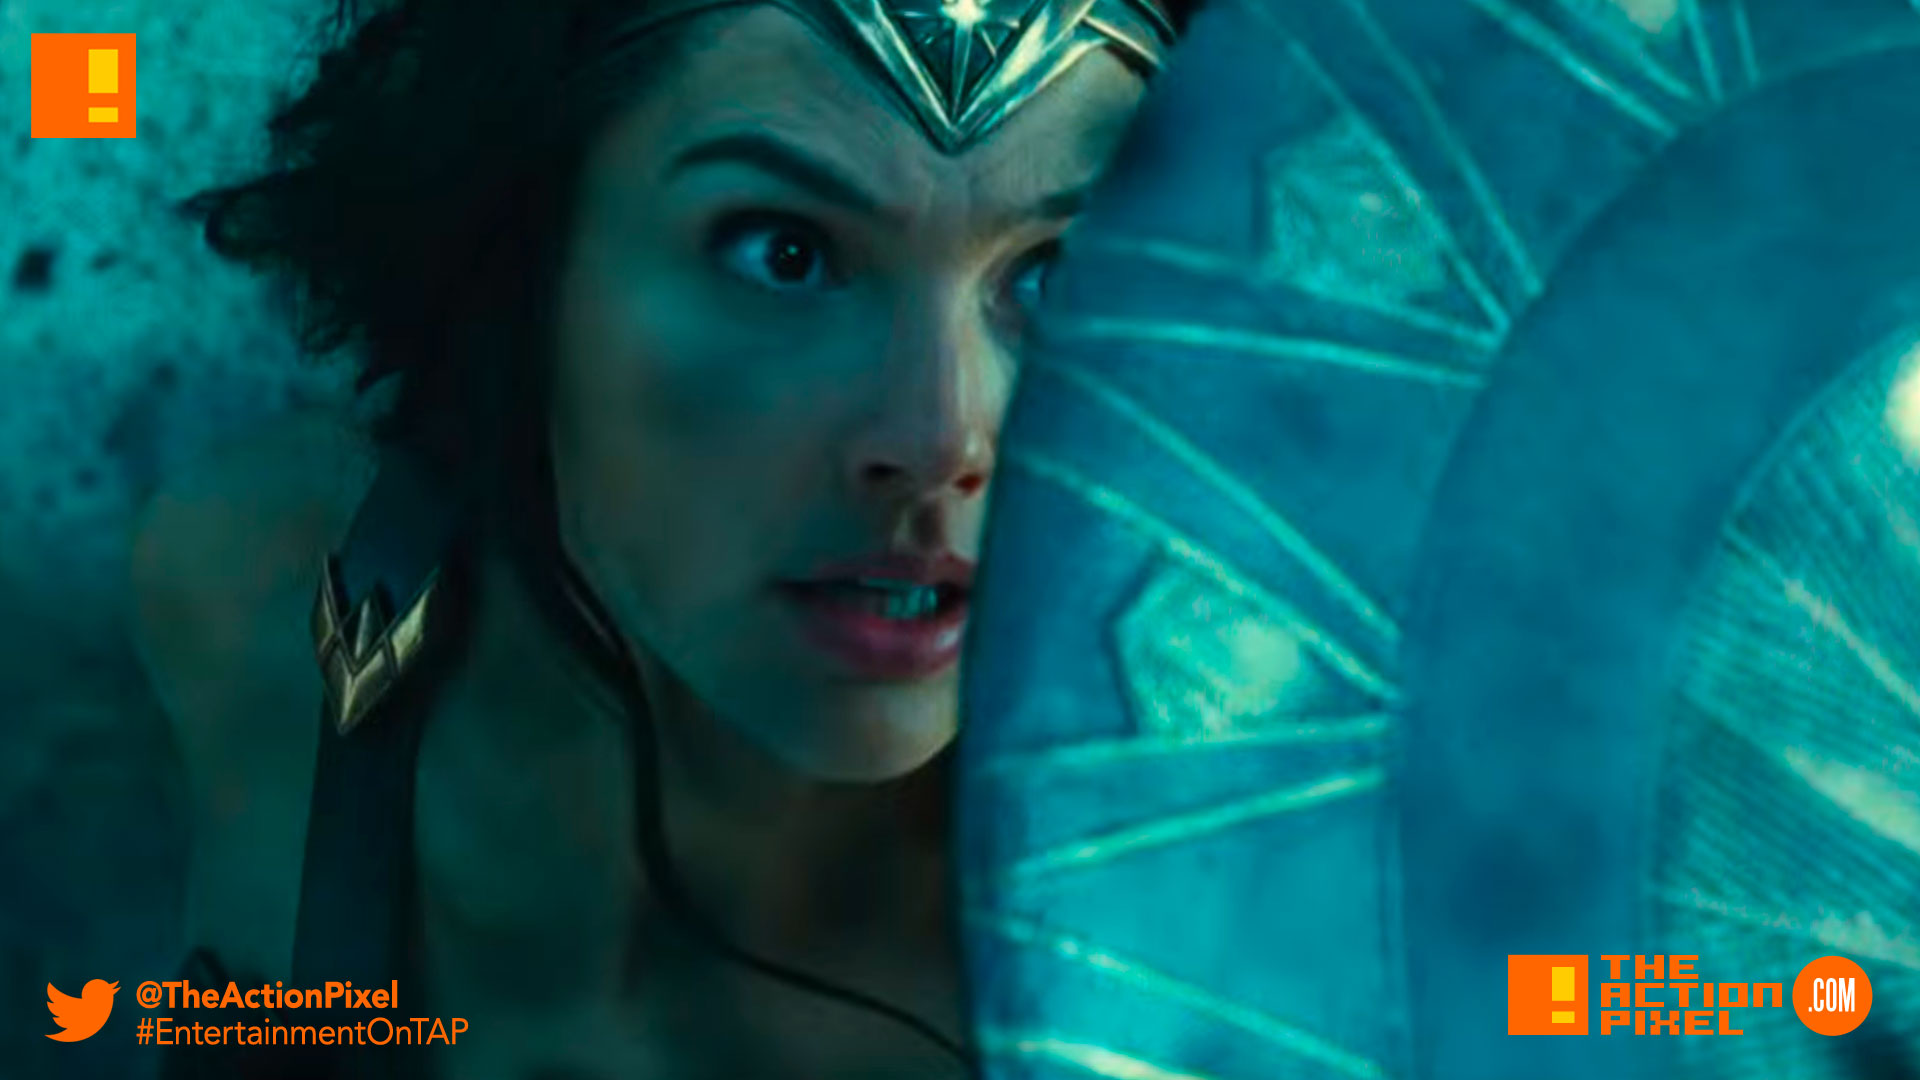 “Wonder Woman” Final trailer signals the rise of the warrior – The